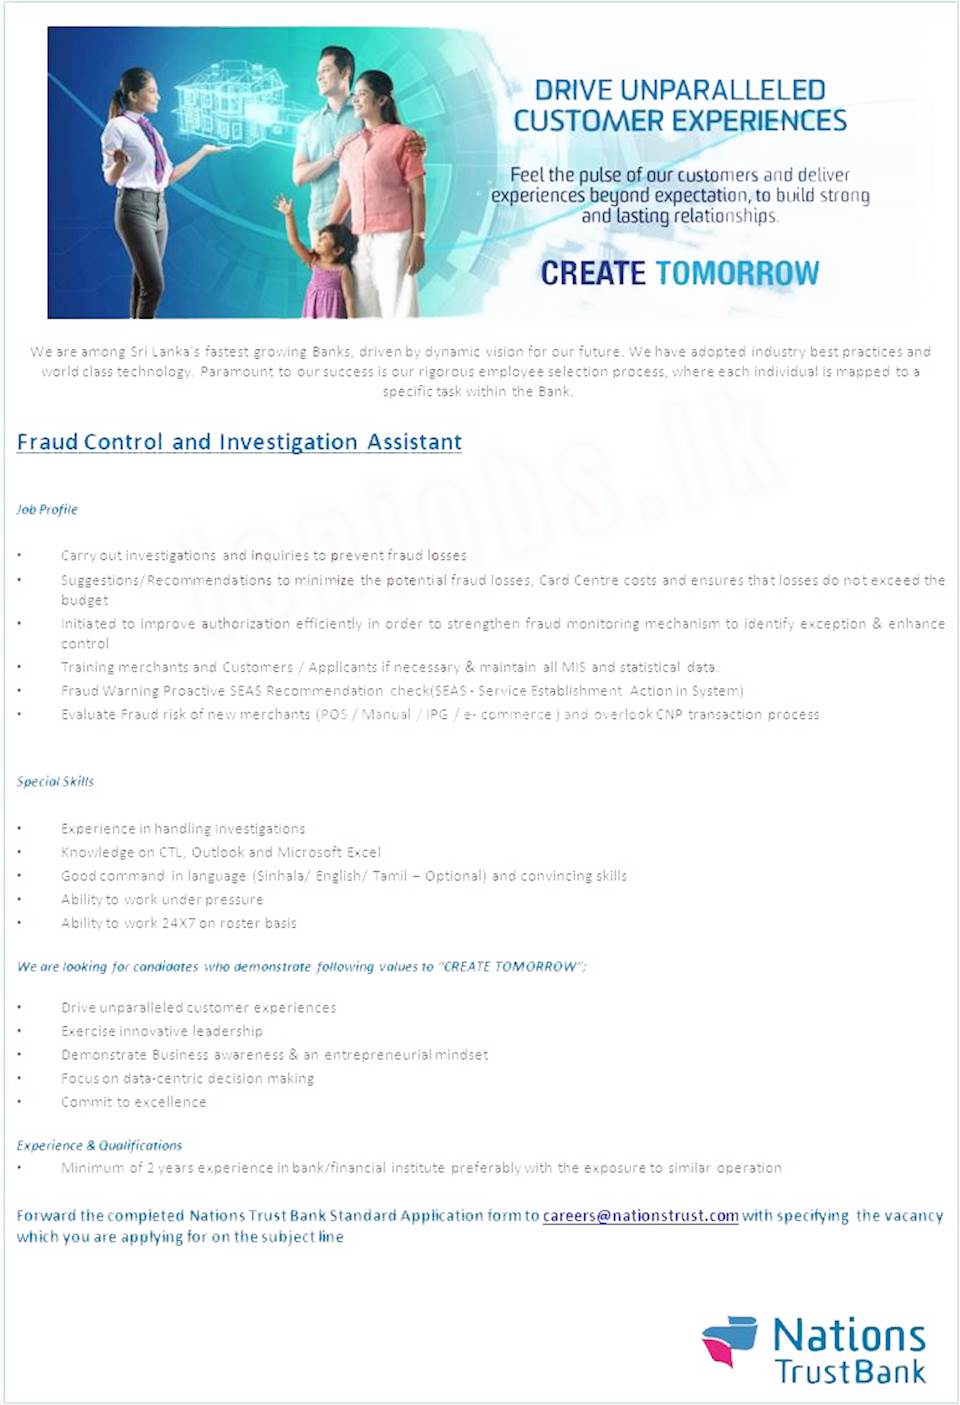 Fraud Control and Investigation Assistant